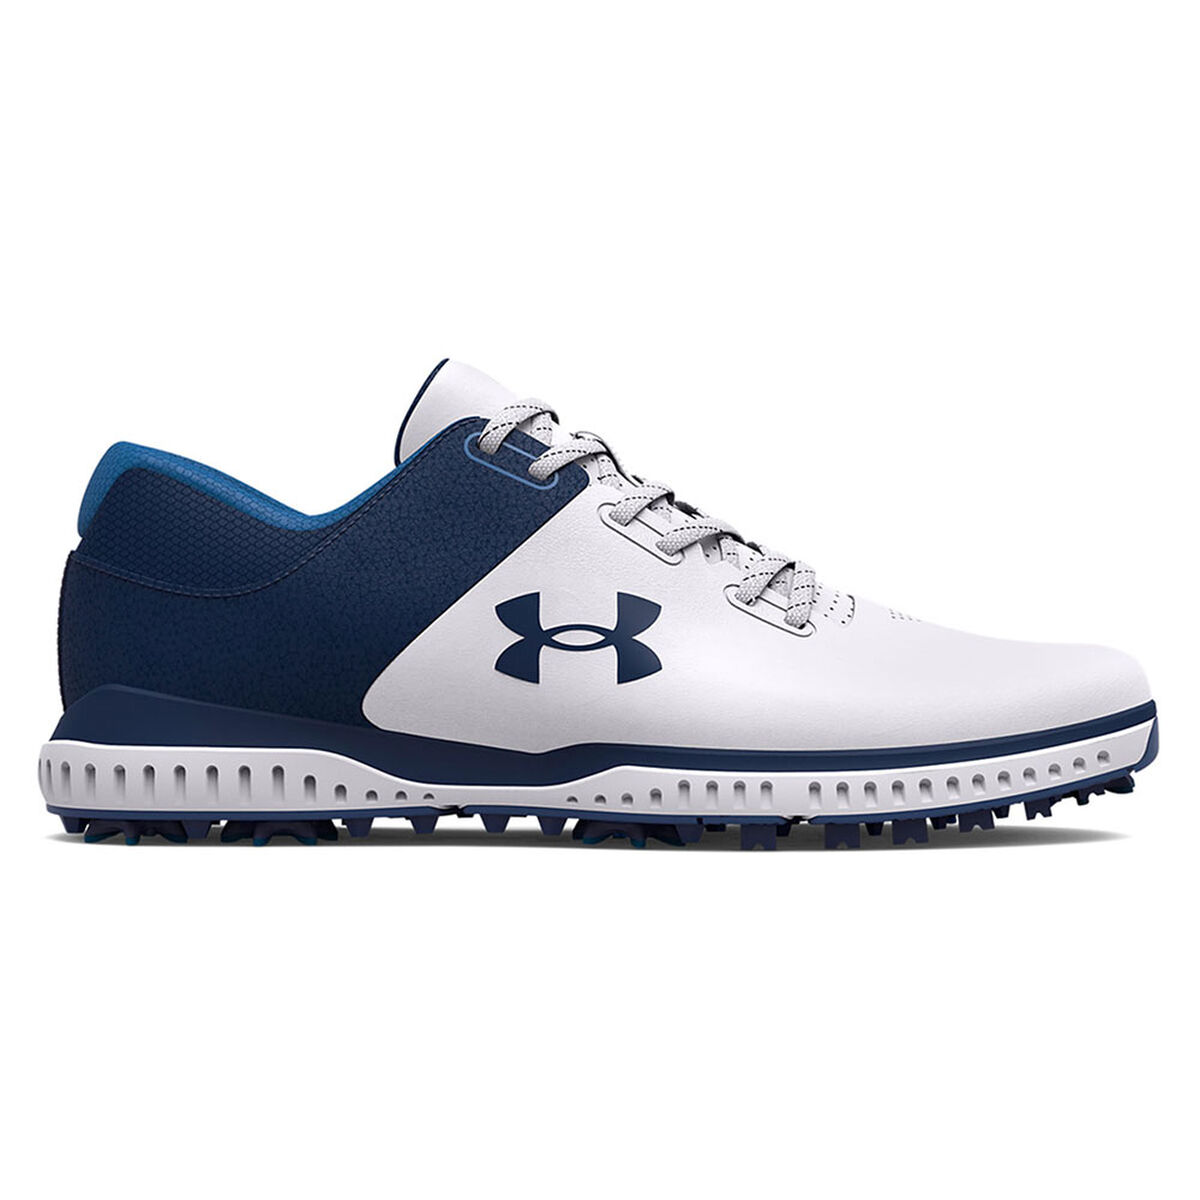 Under Armour Men’s Medal RST Waterproof Spiked Golf Shoes, Mens, White/academy/academy, 9.5 | American Golf